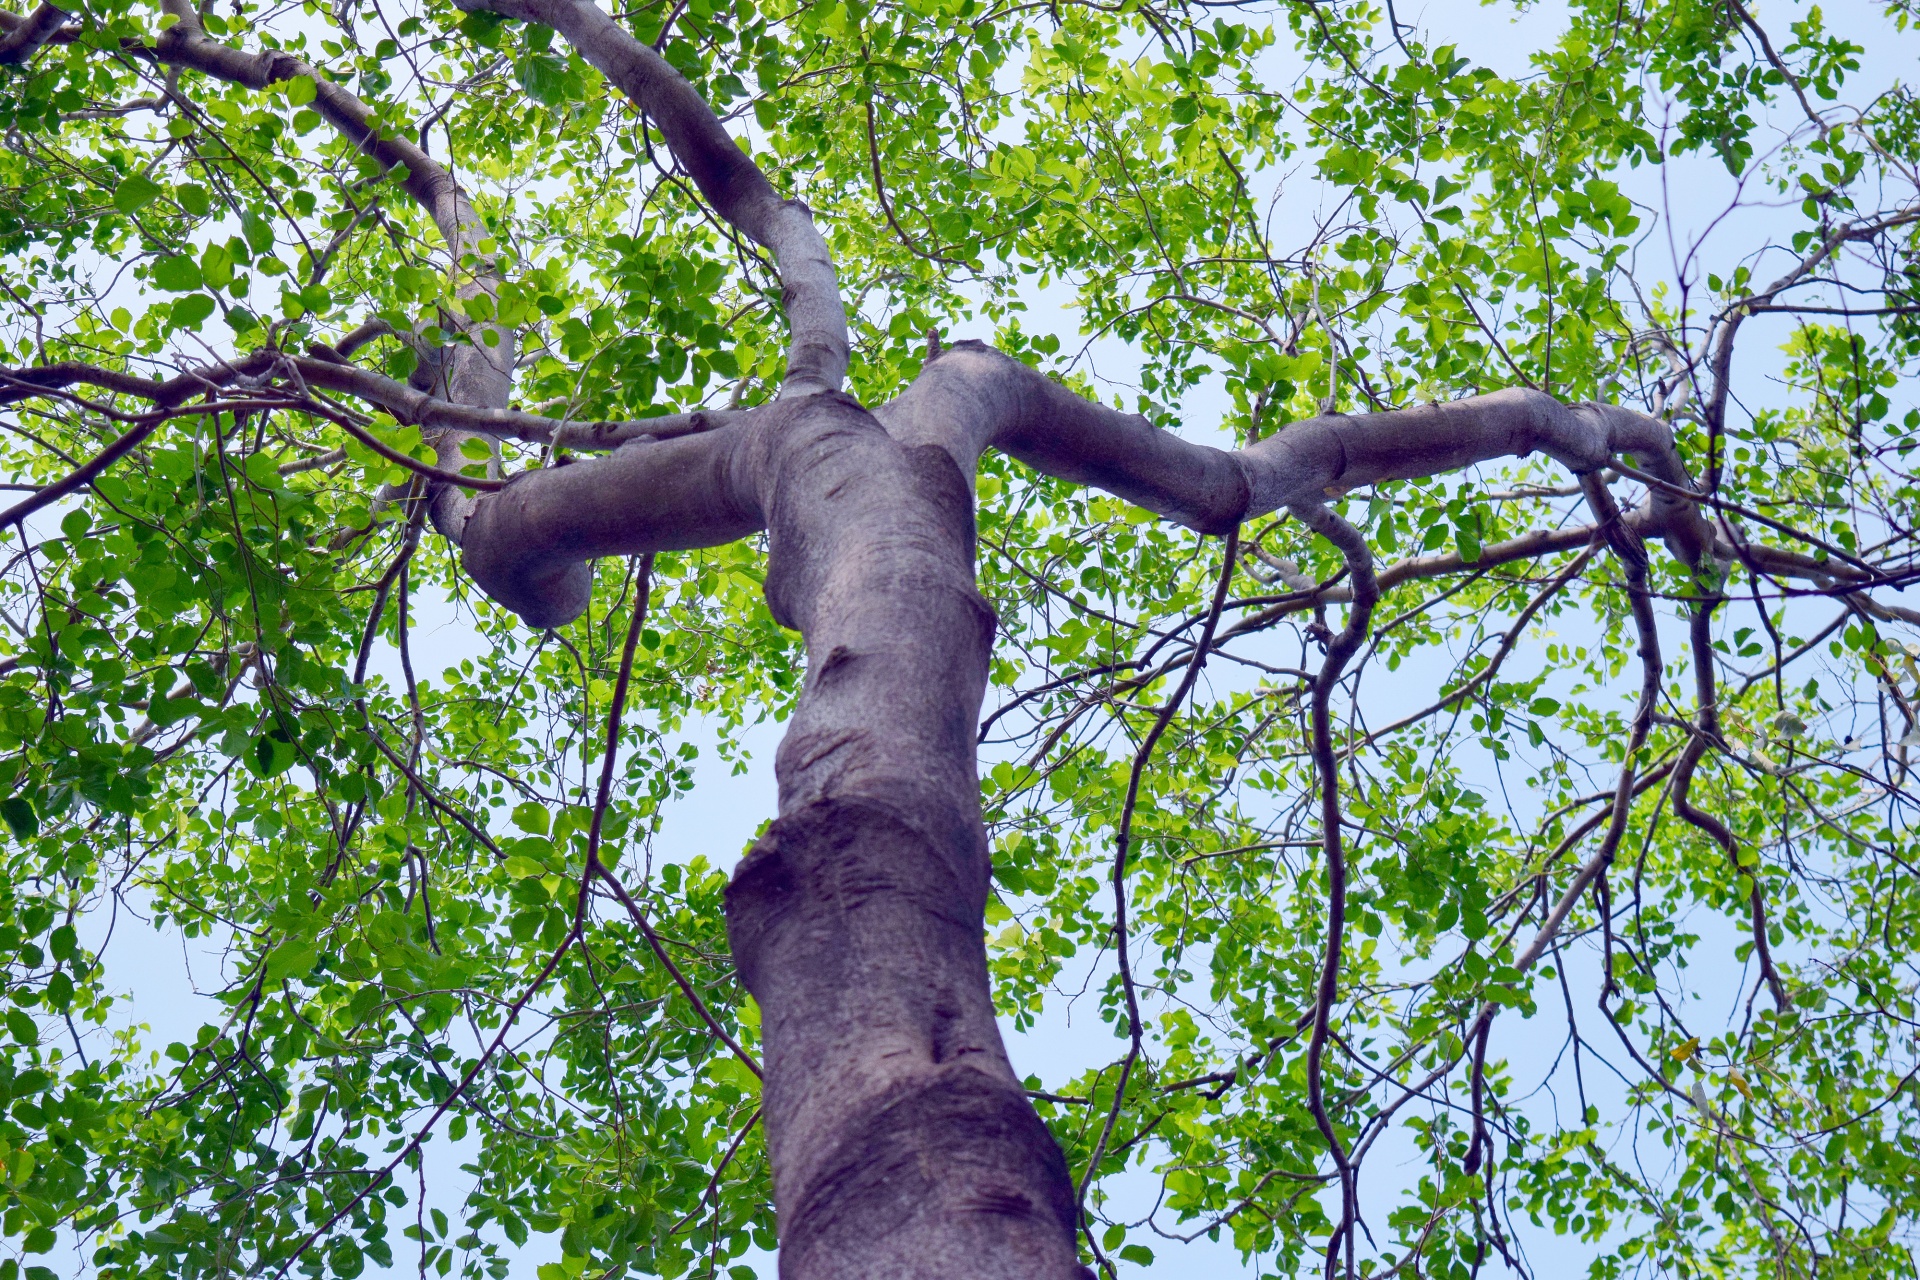 tree branches leaves free photo